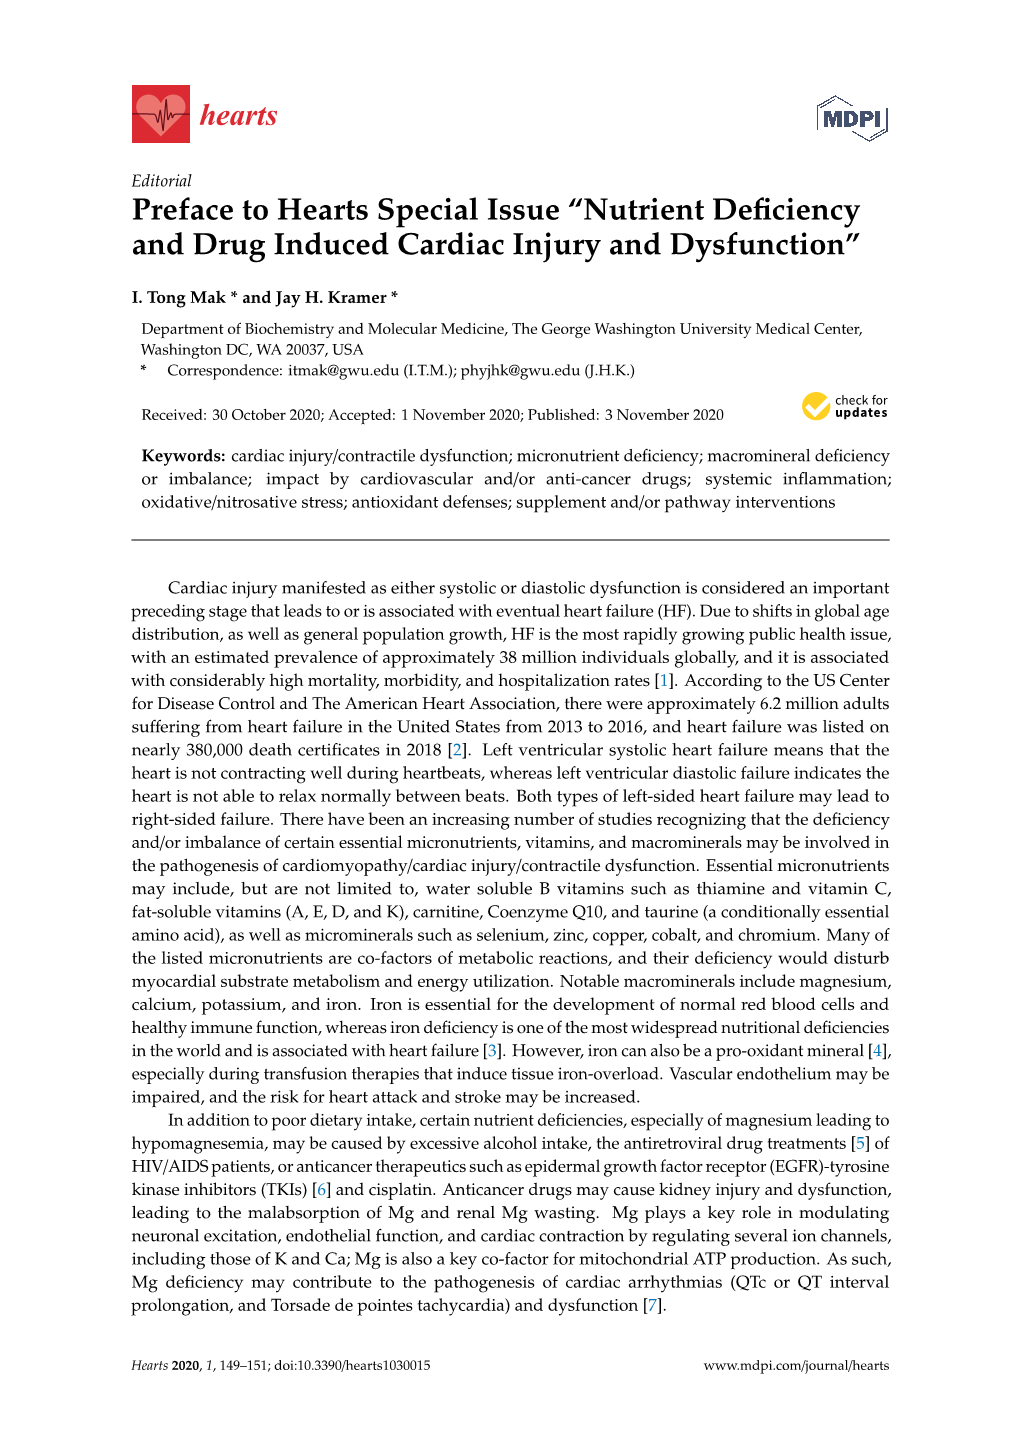 Nutrient Deficiency and Drug Induced Cardiac Injury and Dysfunction